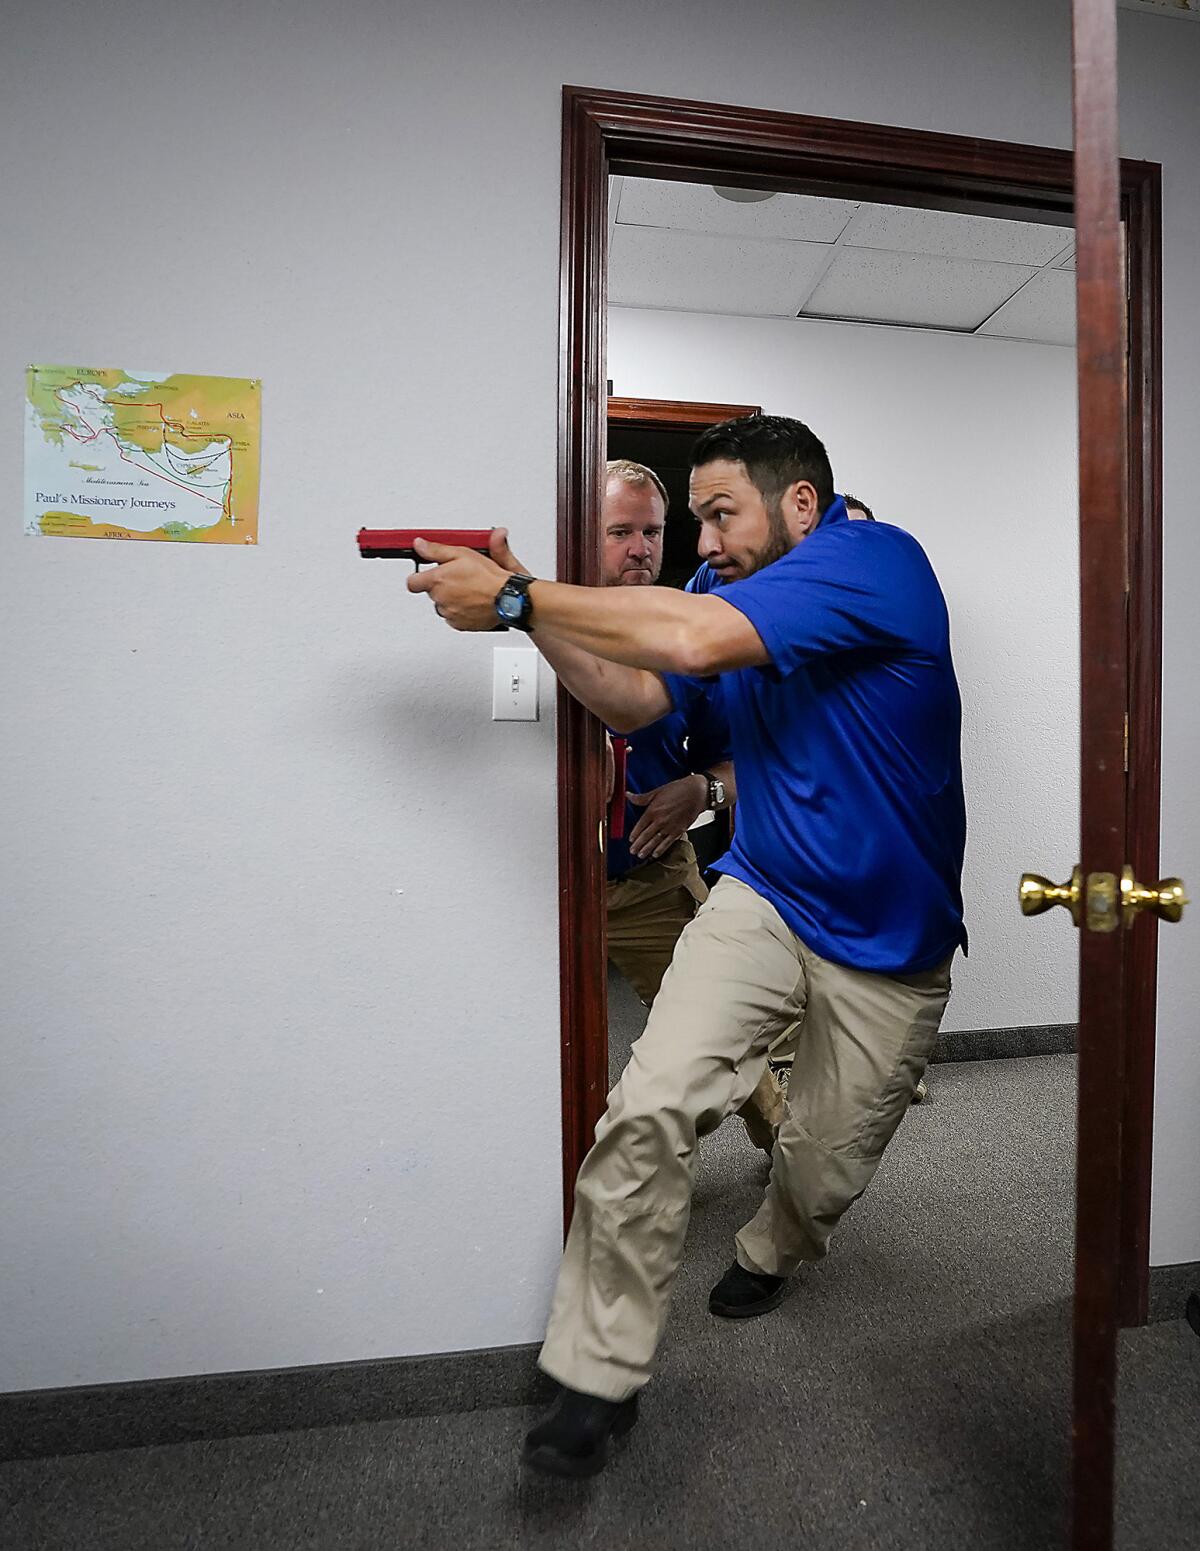 Instructor demonstrates how to enter an active room during security training at Texas church